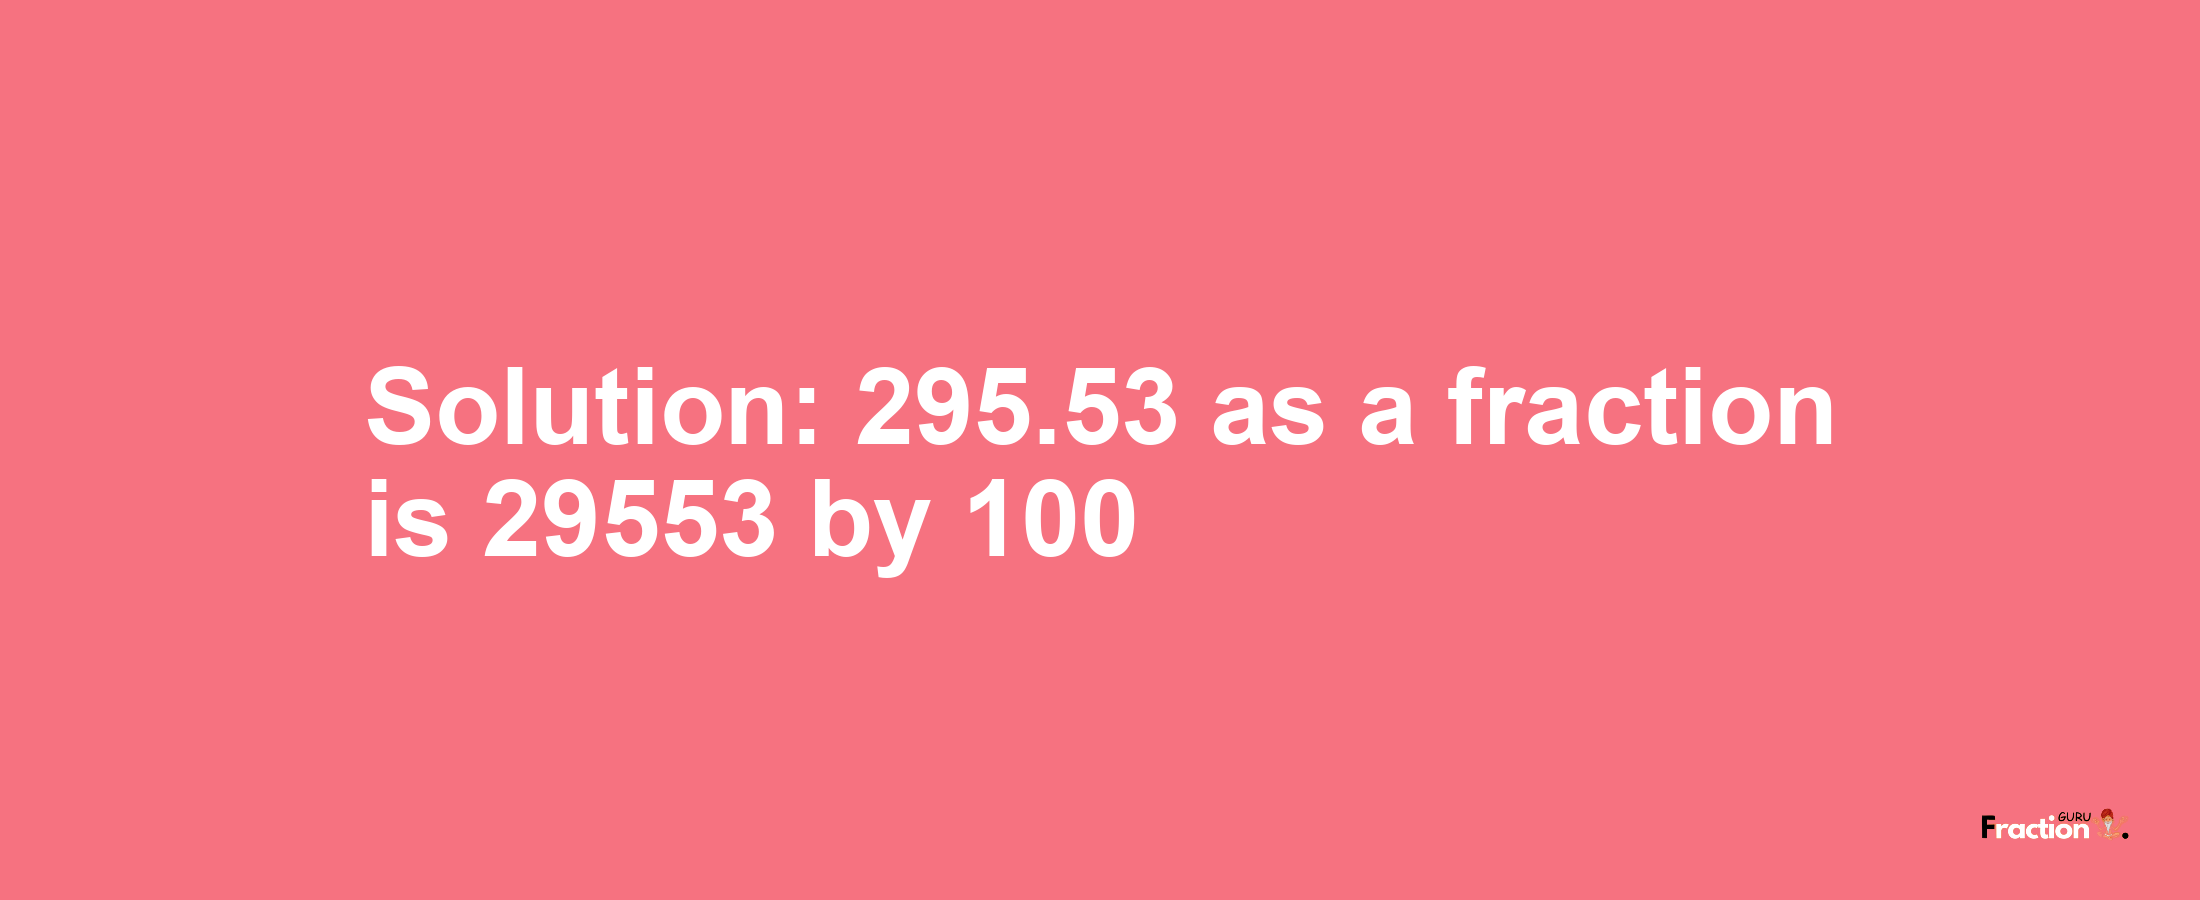 Solution:295.53 as a fraction is 29553/100